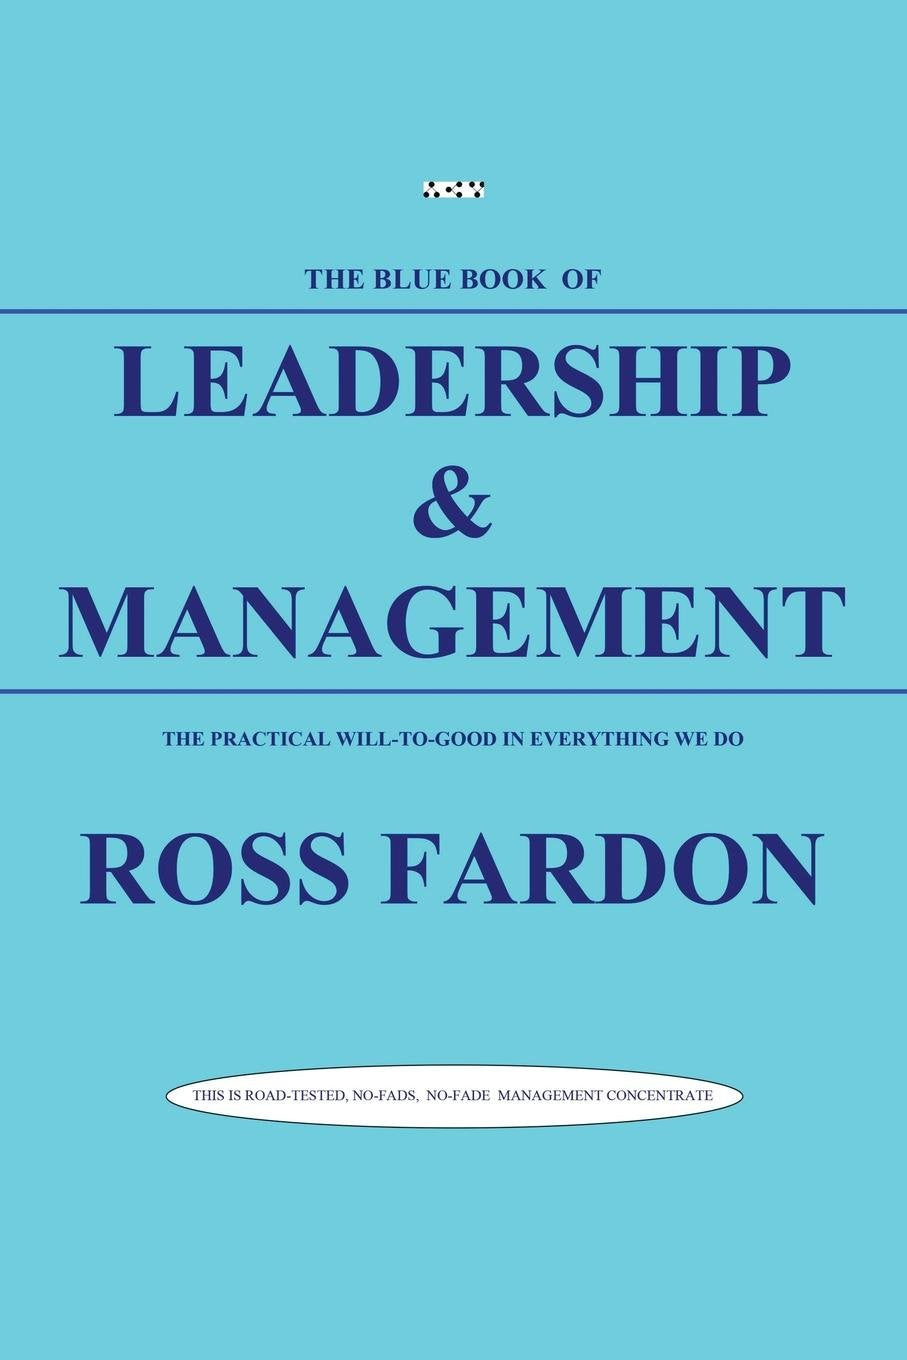 The Blue Book of Leadership and Management: The Practical Will-To-Good in Everything We Do